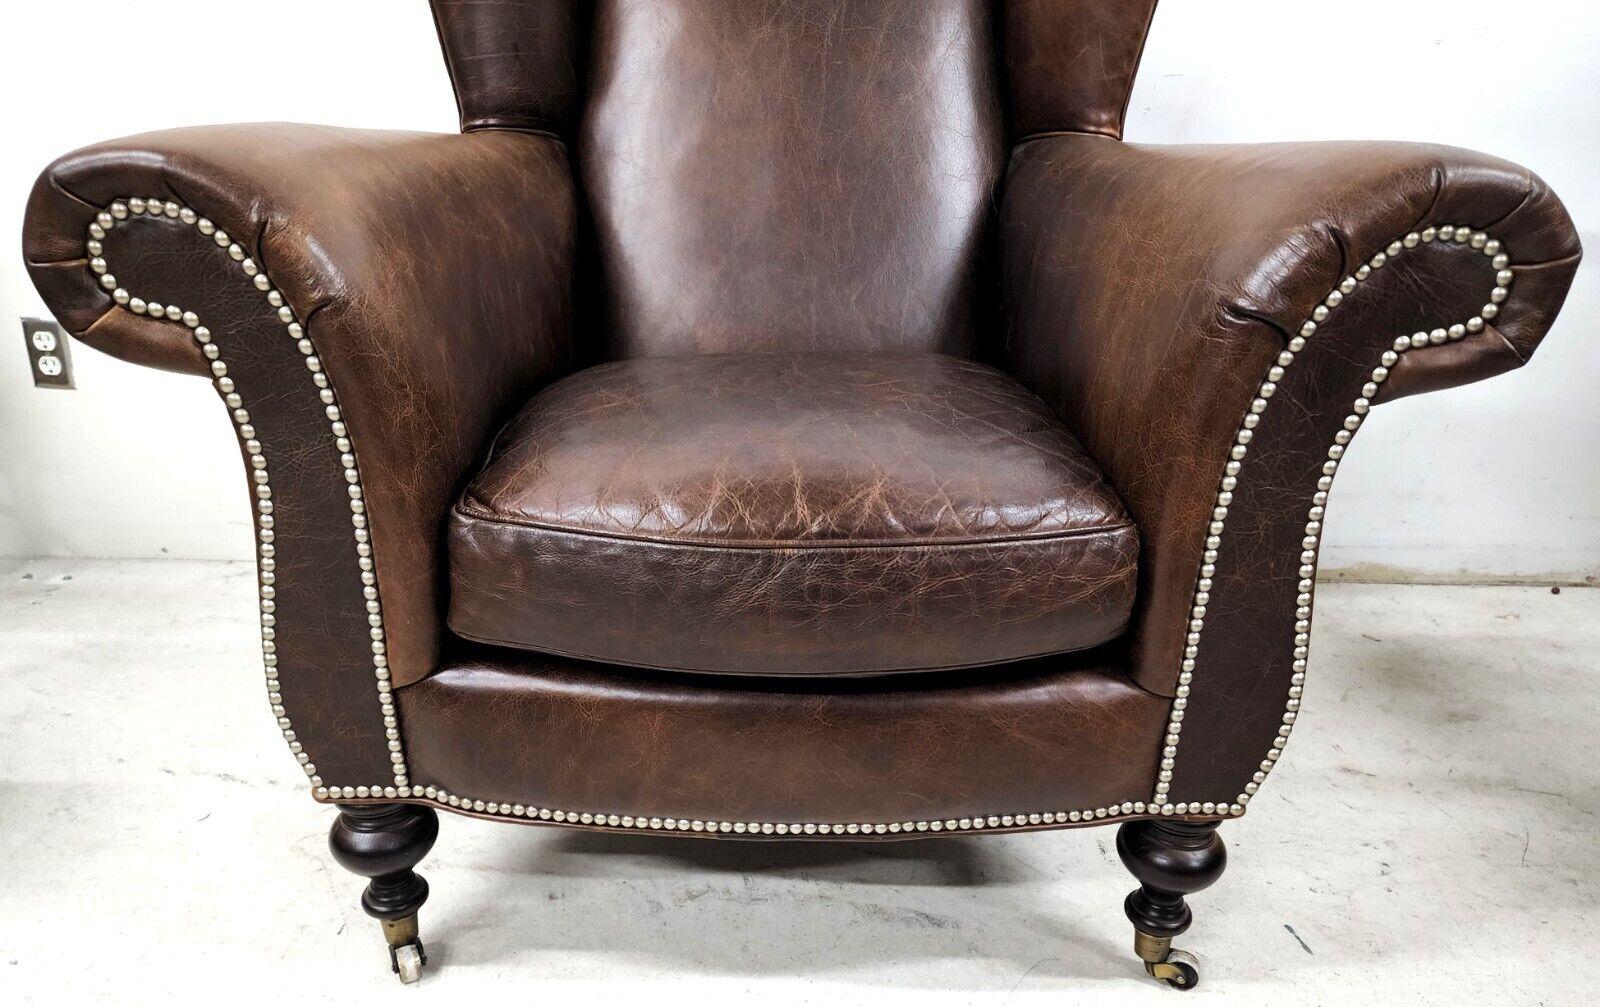 leather reading chair and ottoman